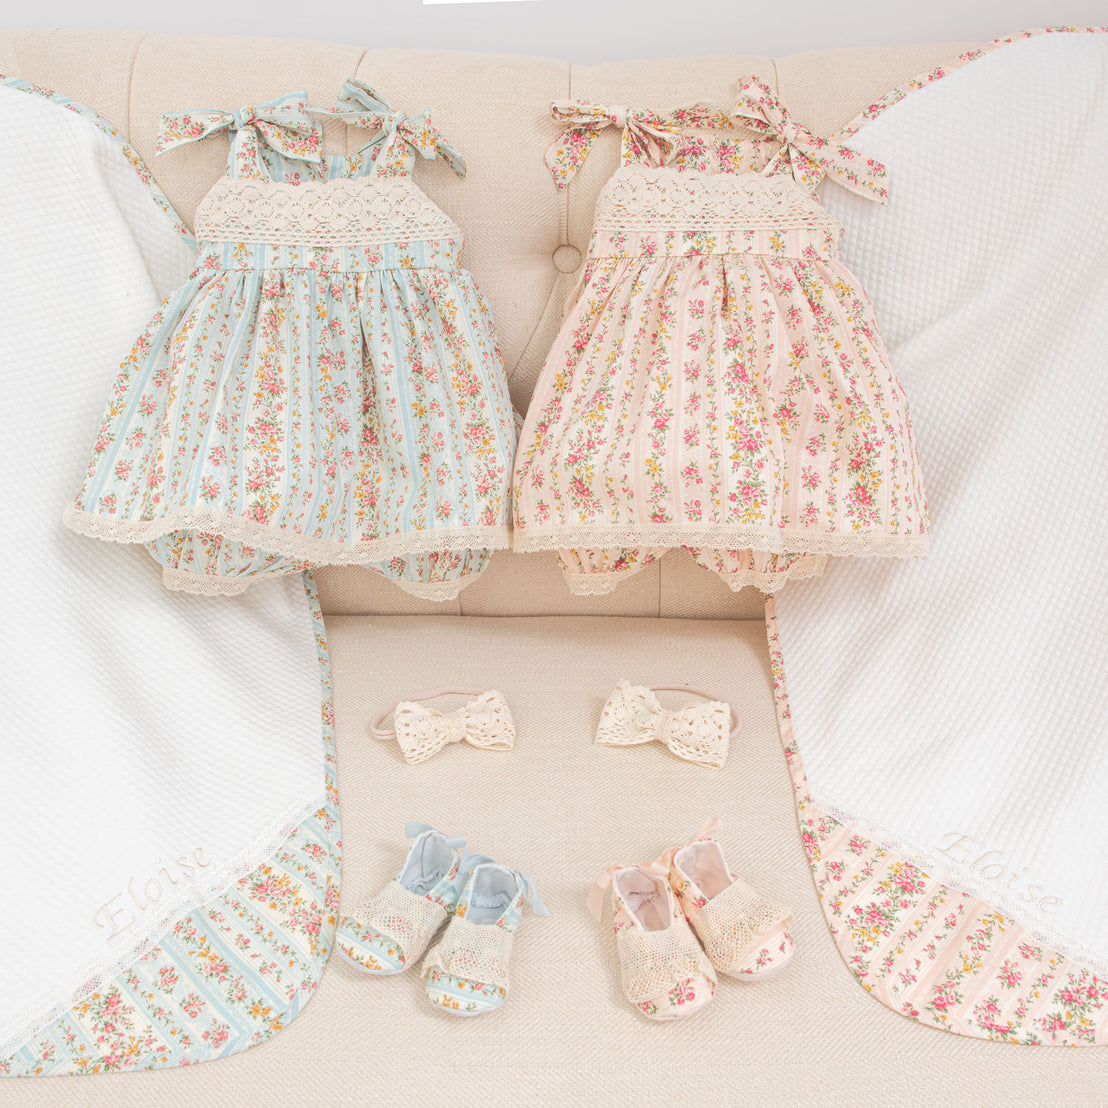 Comparison of the "Blush" and "Powder Blue" variant colors of the Eloise Romper Dress, Booties, Bow Headband, and Personalized Blanket.